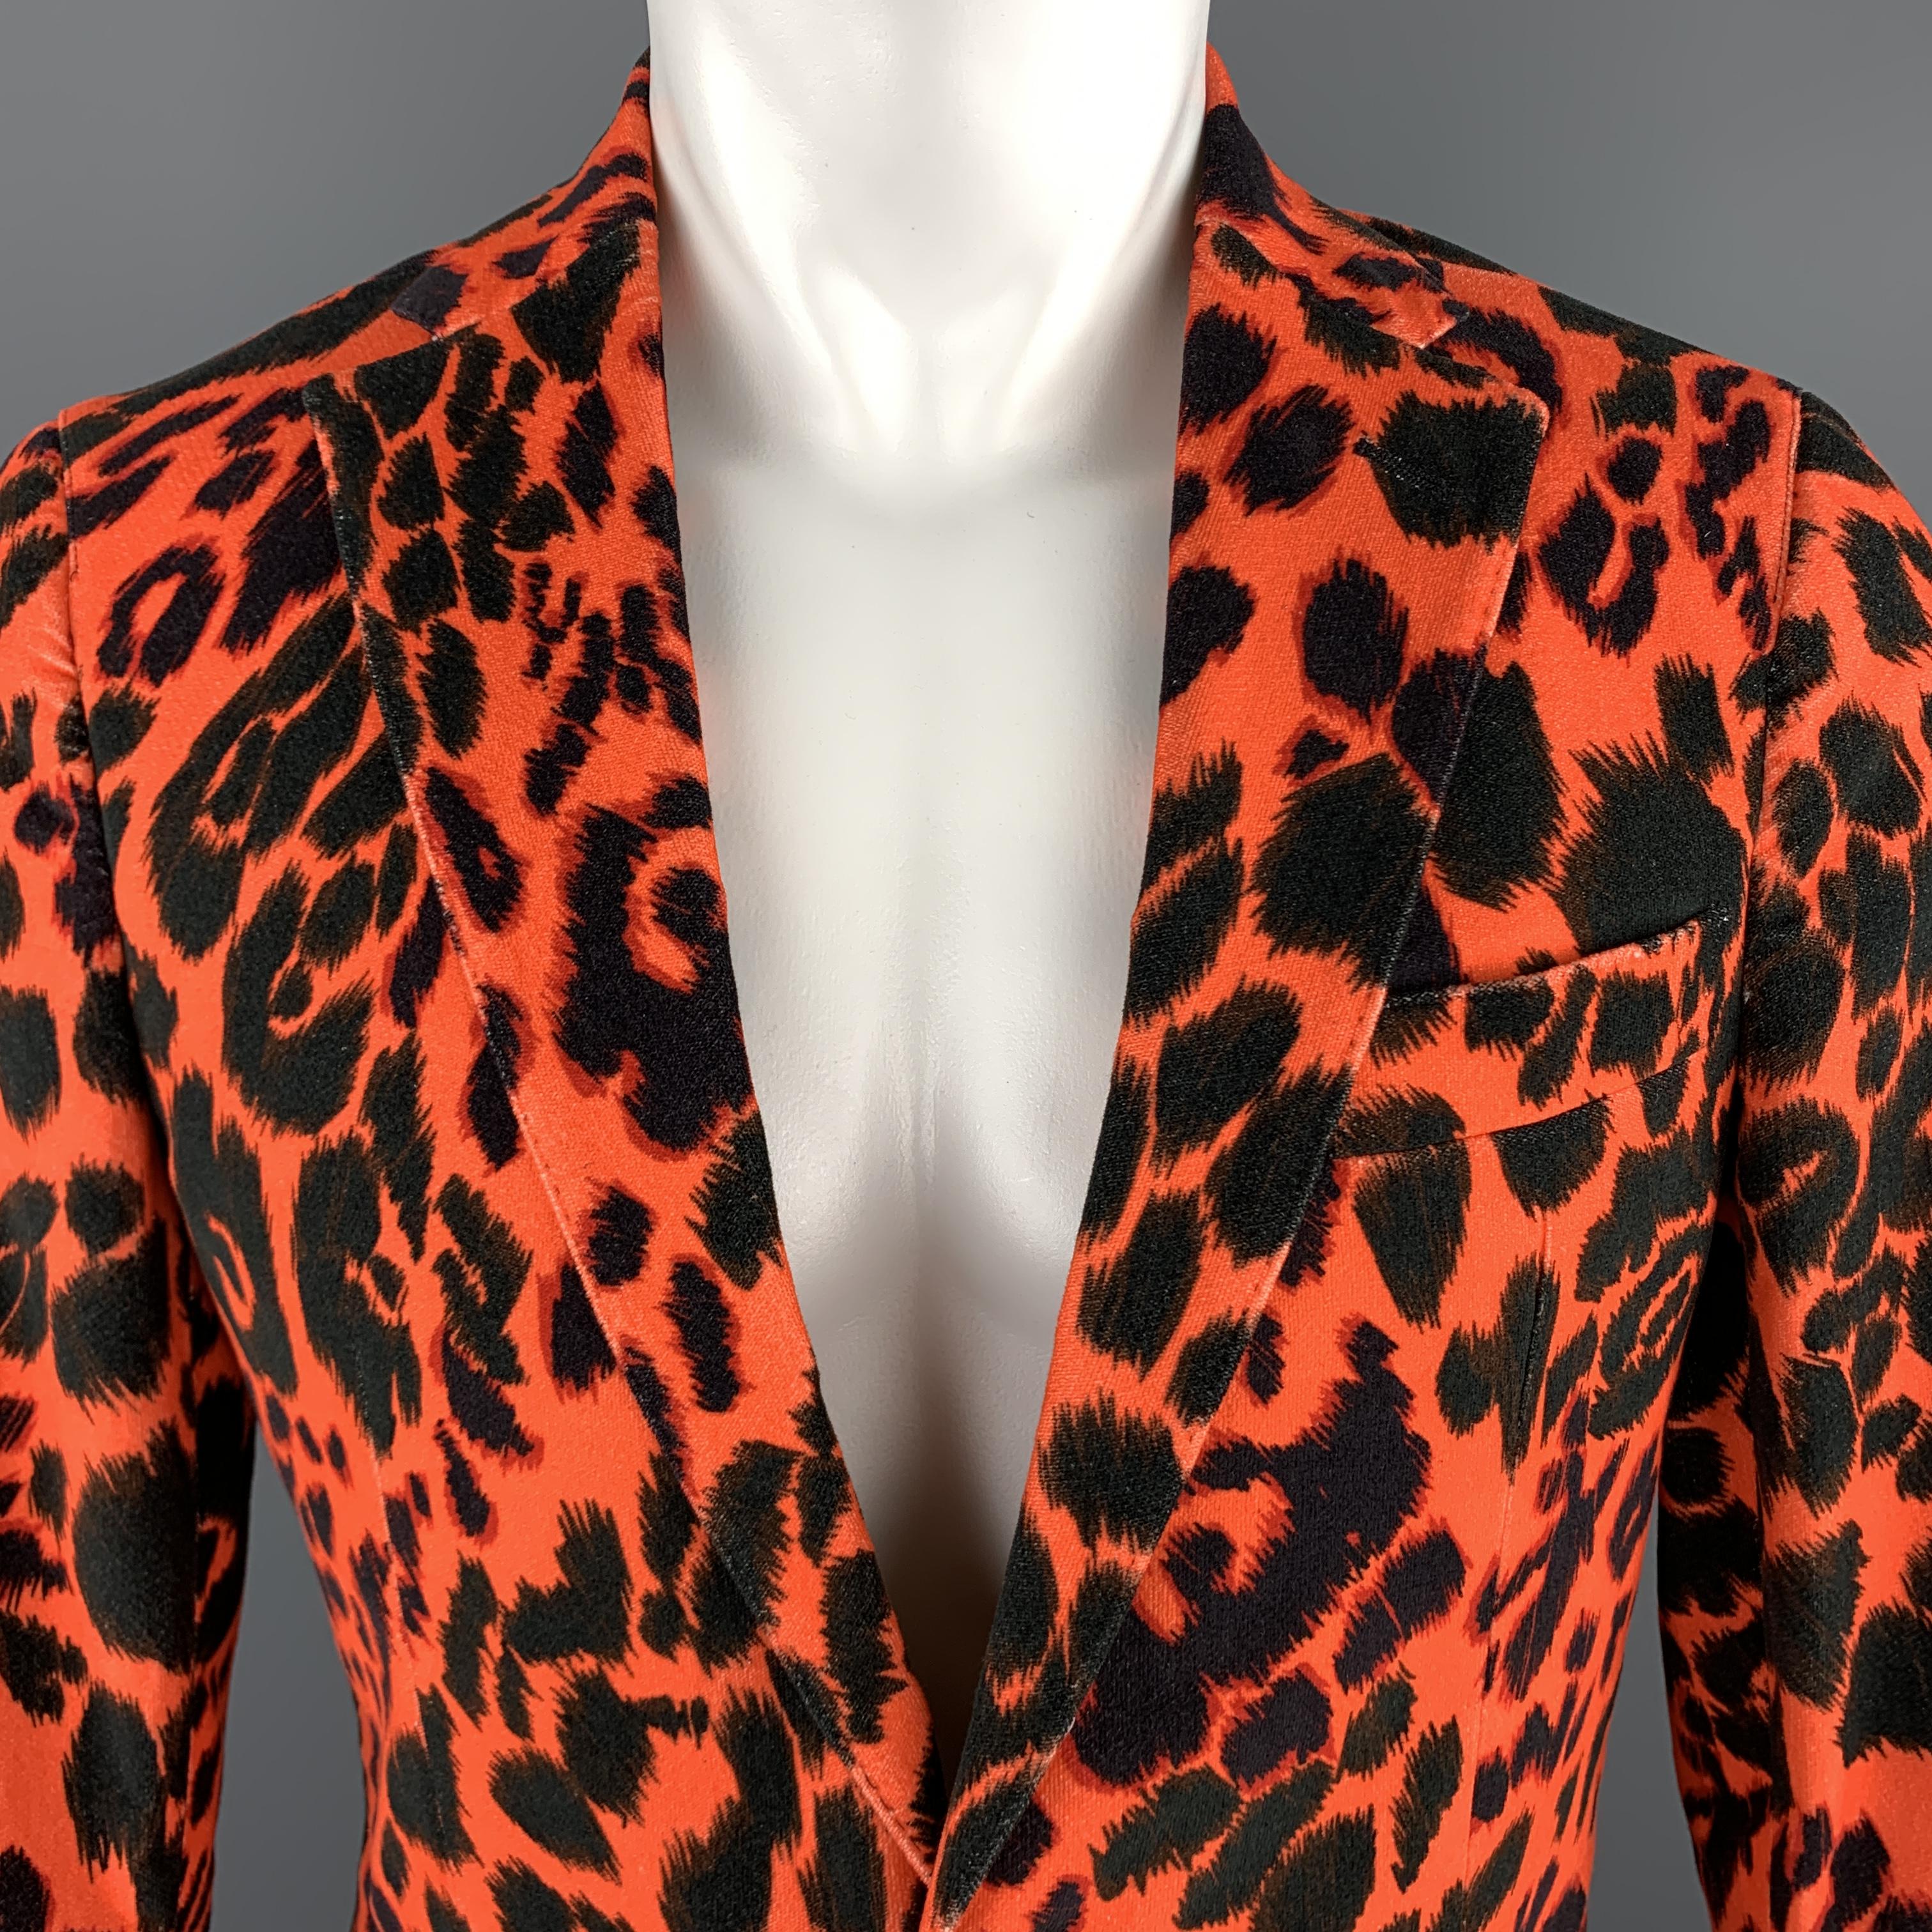 R13 sport coat comes in vibrant orange and black retro leopard printed cotton velvet with a notch lapel, single breasted, two button front, and functional button front. Made in USA.

Excellent Pre-Owned Condition. 
Marked: US 38 REG
Original Retail